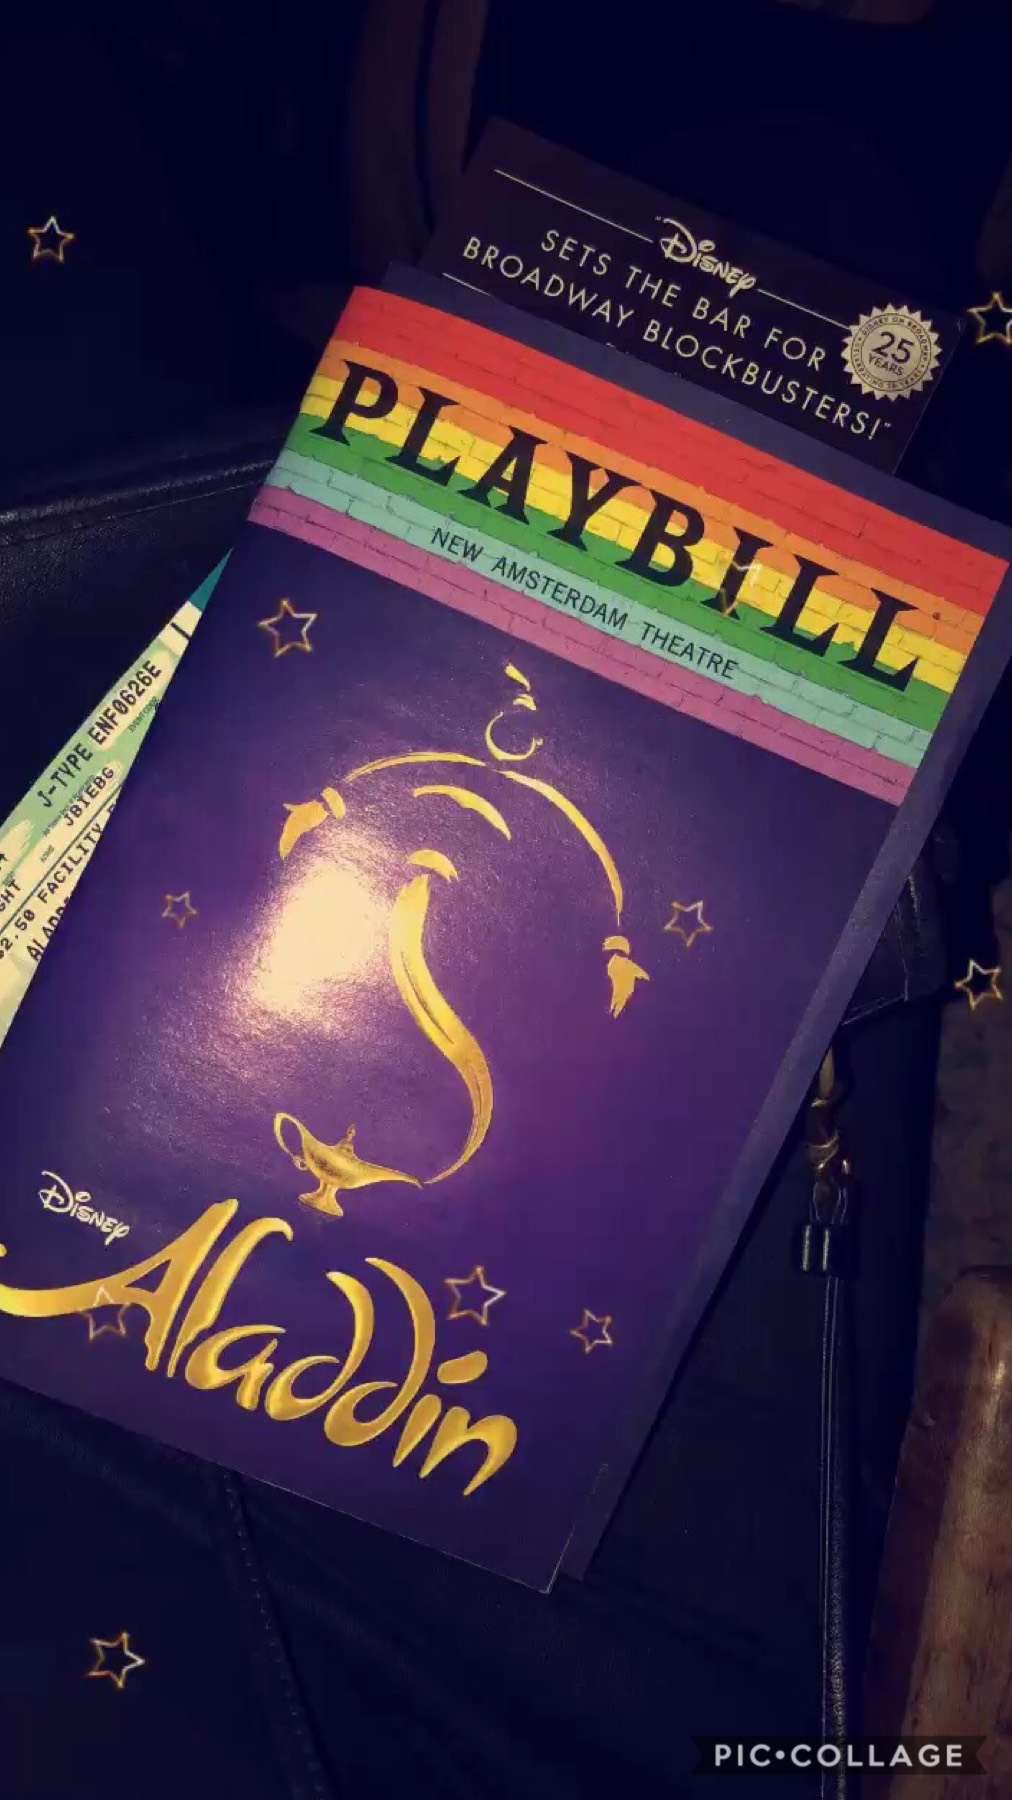 🌈🌈🌈Aladdin was like so good I love Disney sm and it was just such a good musical,, I’m in ny and I’m rlly excited to go to the museums ahhhh🌈🌈🌈